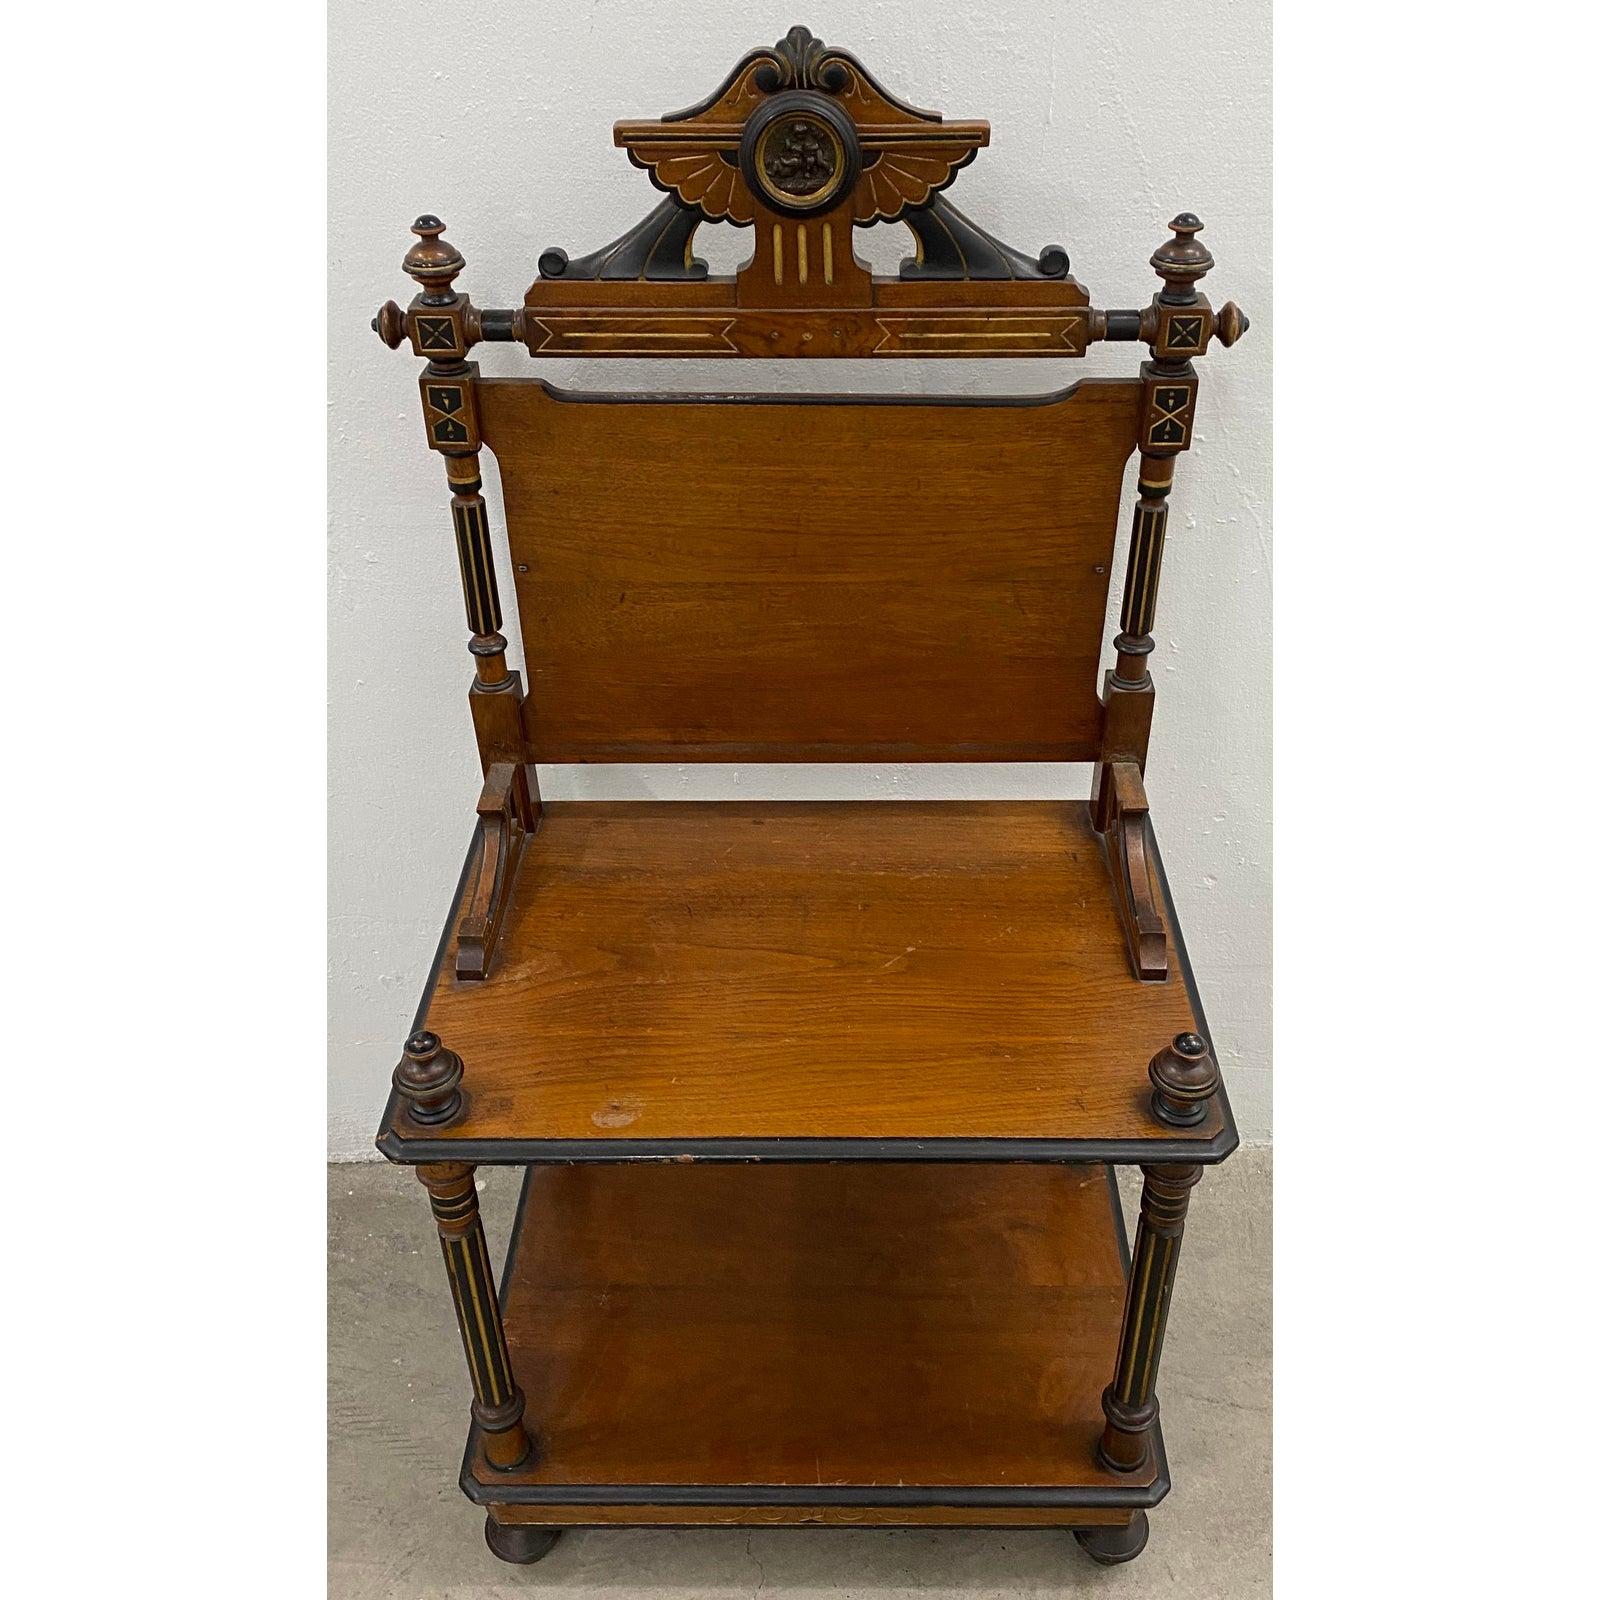 19th century English mahogany server / console table

Lovely handmade server / console with hand painted and gilded highlights.

The crest show a pair of playful putti.

The server can be used in any room in your home. It can function as a